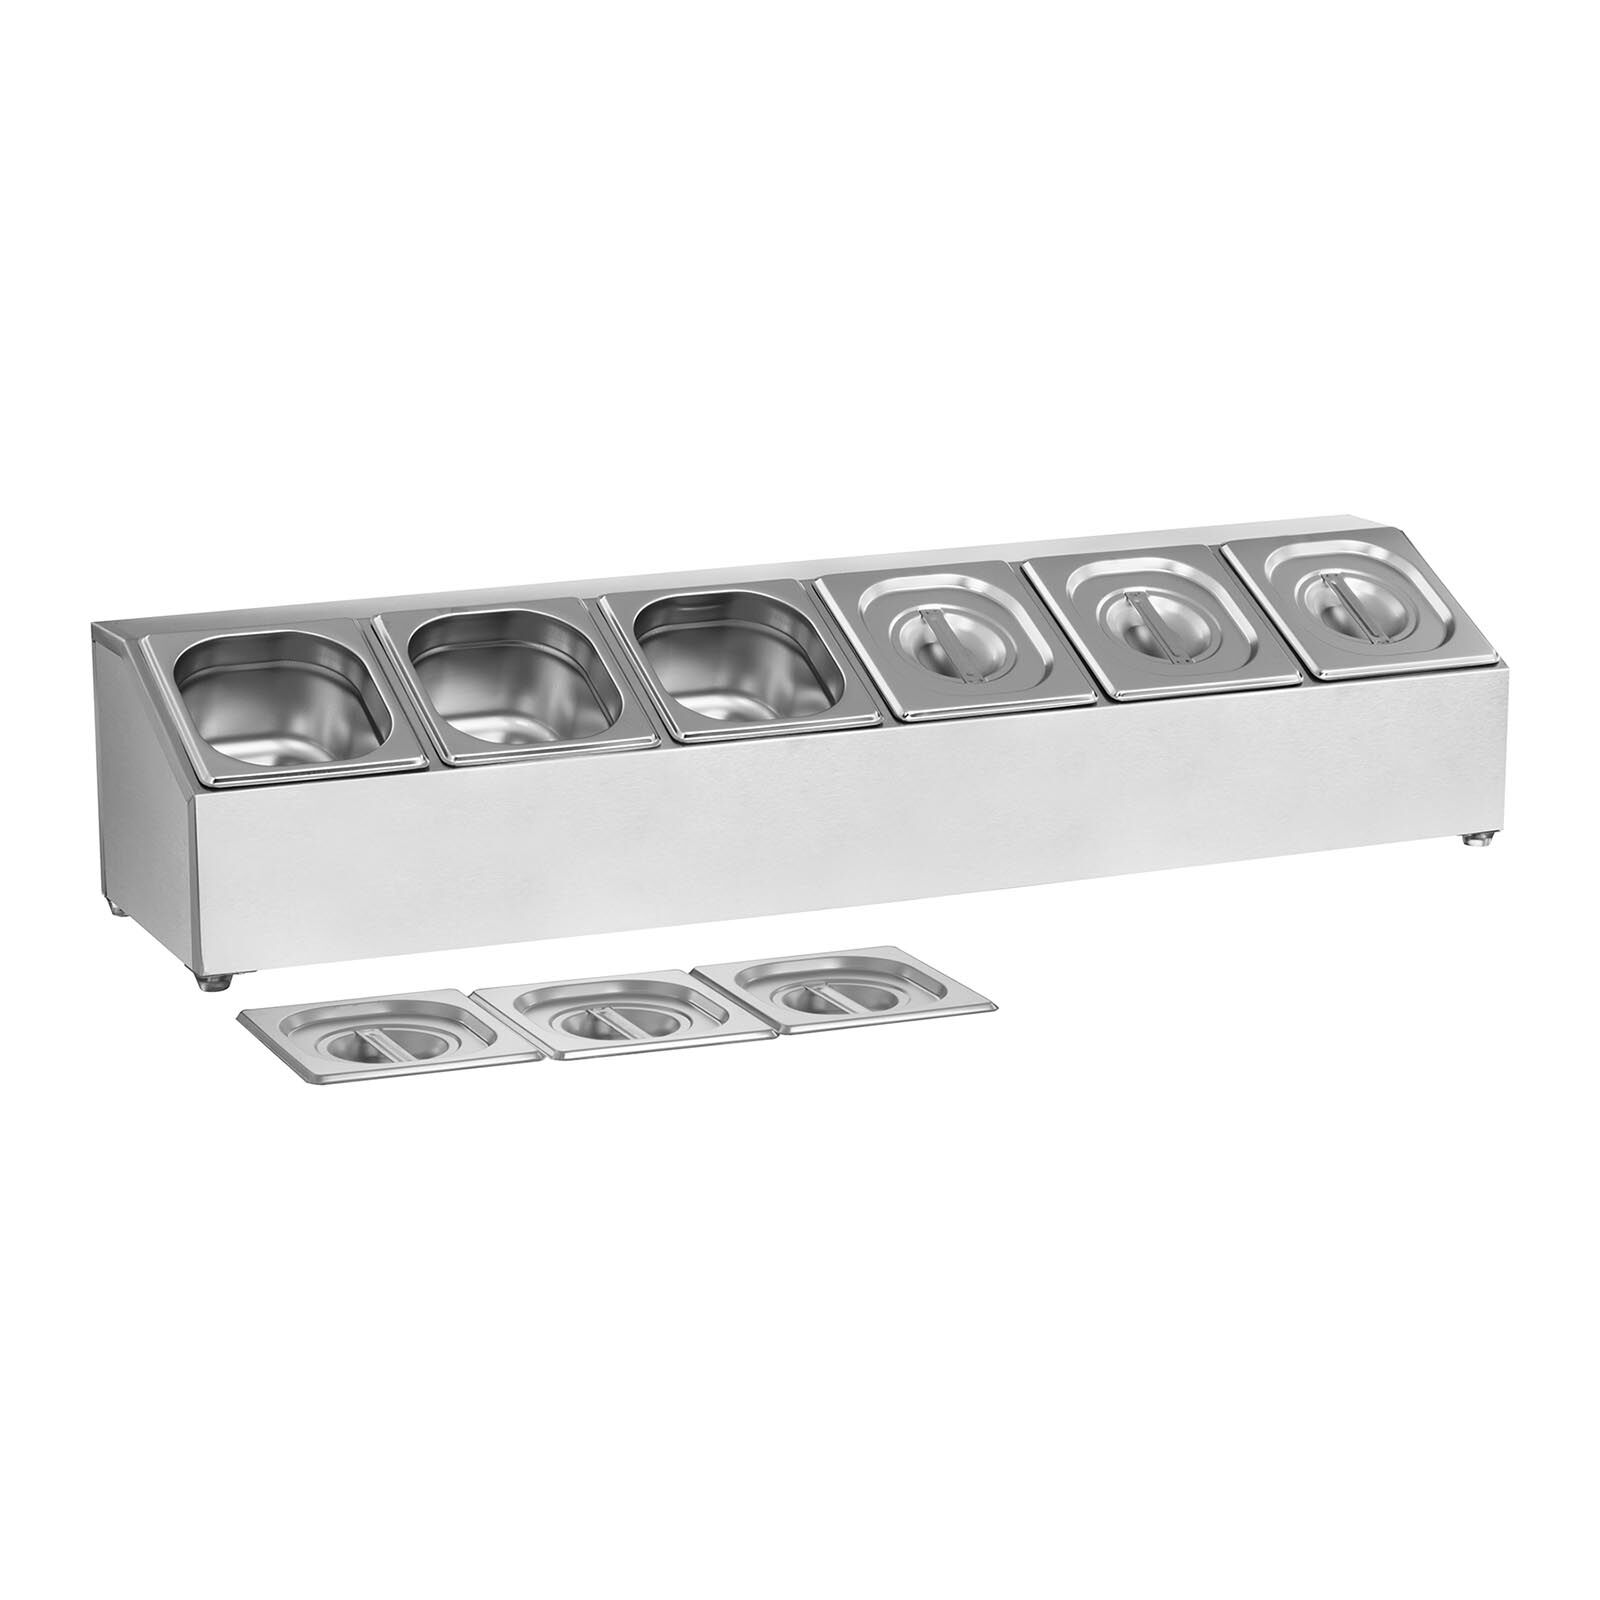 Royal Catering Gastronorm Pan Holder - Incl 6 1/6 Gastronorm Containers with Lids